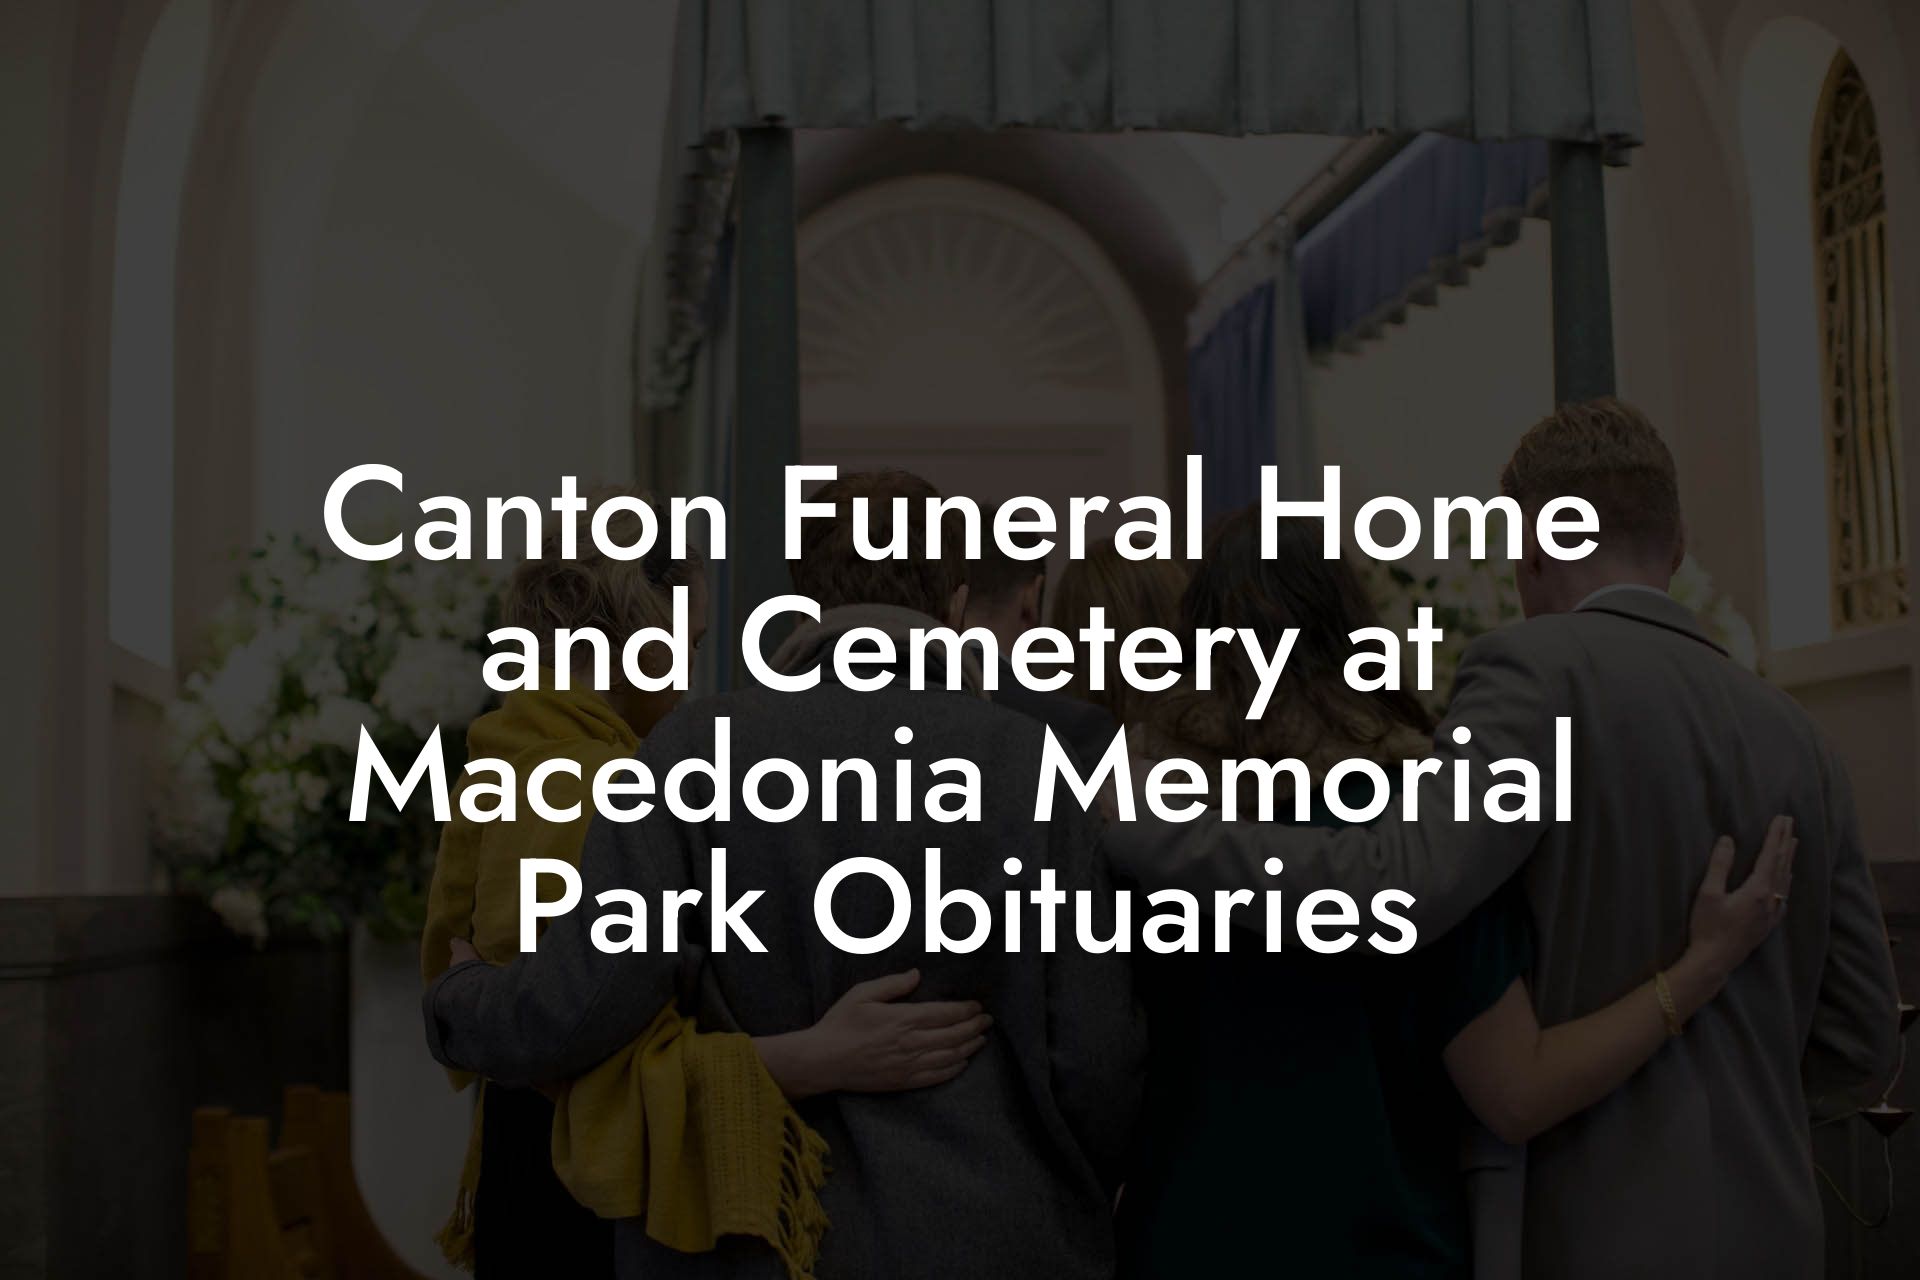 Canton Funeral Home and Cemetery at Macedonia Memorial Park Obituaries